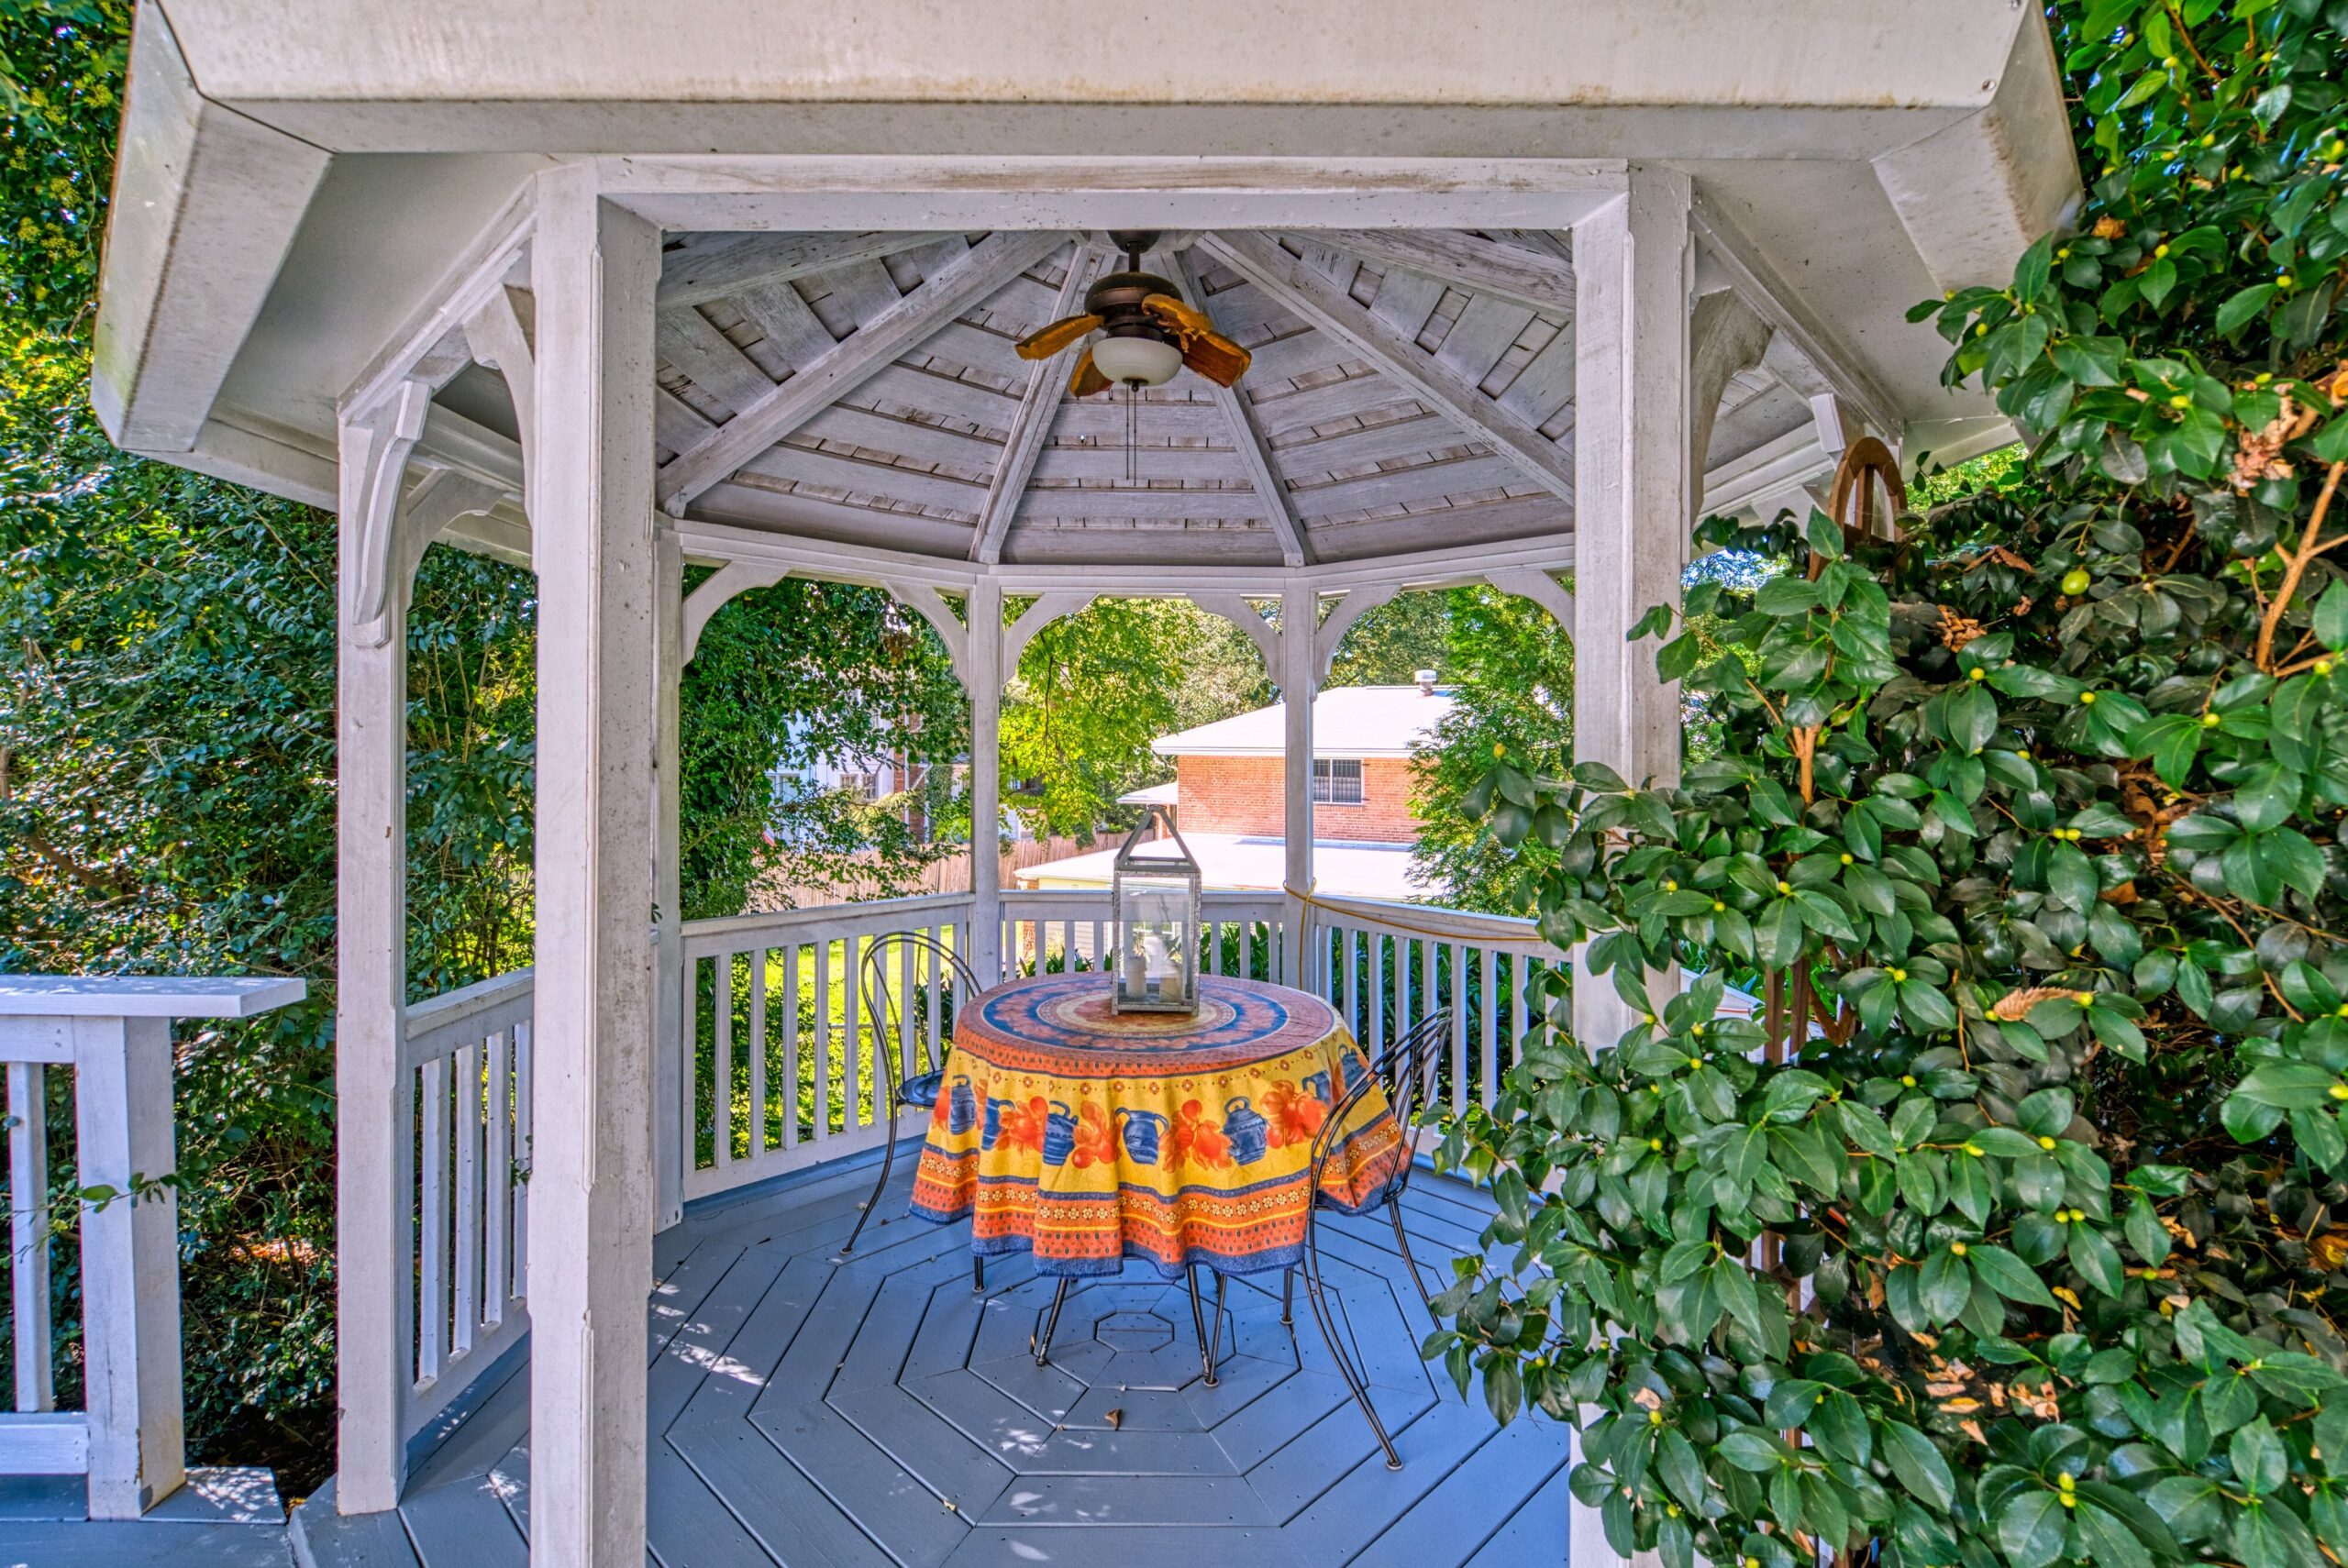 Exterior professional photo of 1826 Varnum St NW - showing a painted white wooden gazebo with a ceiling fan on a deck and cute bright tablecloth on patio set